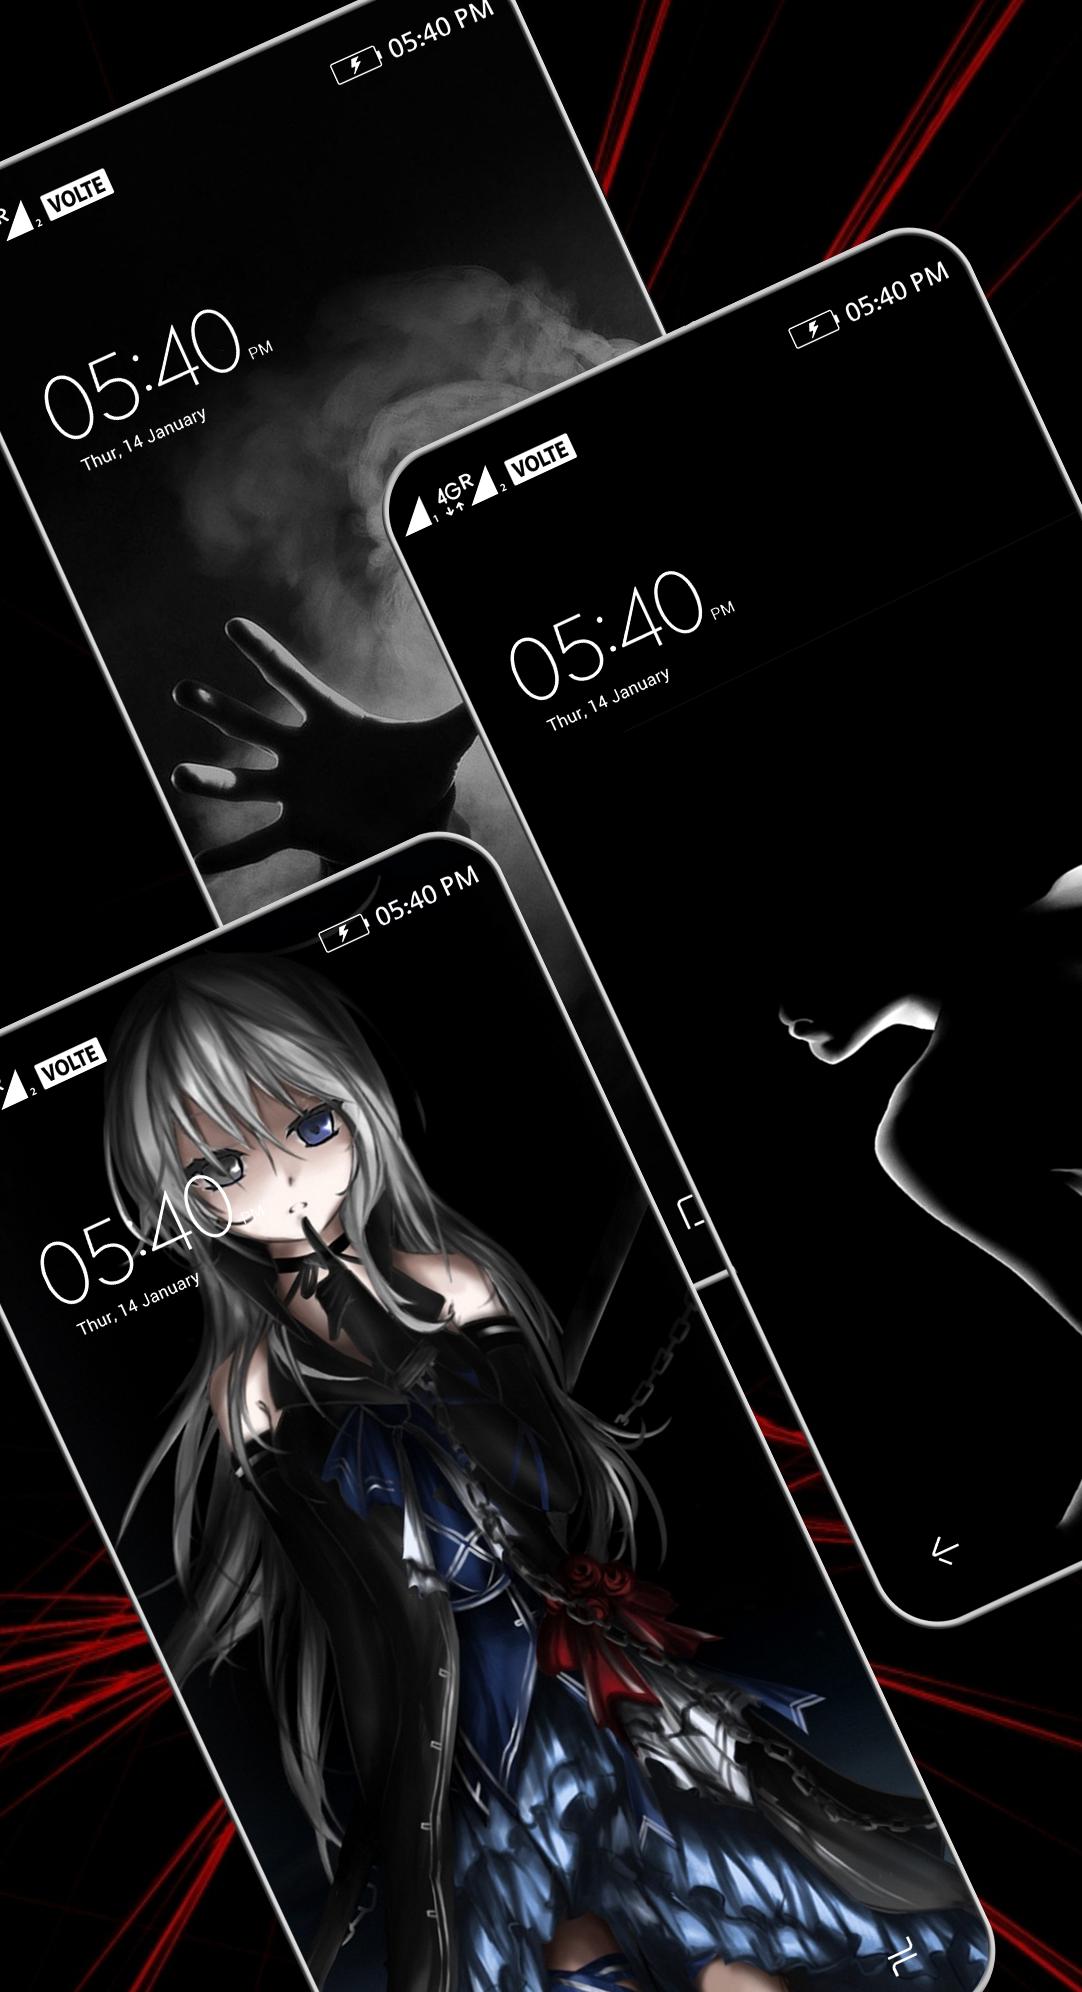 Anime Dark Wallpaper Hd For Android